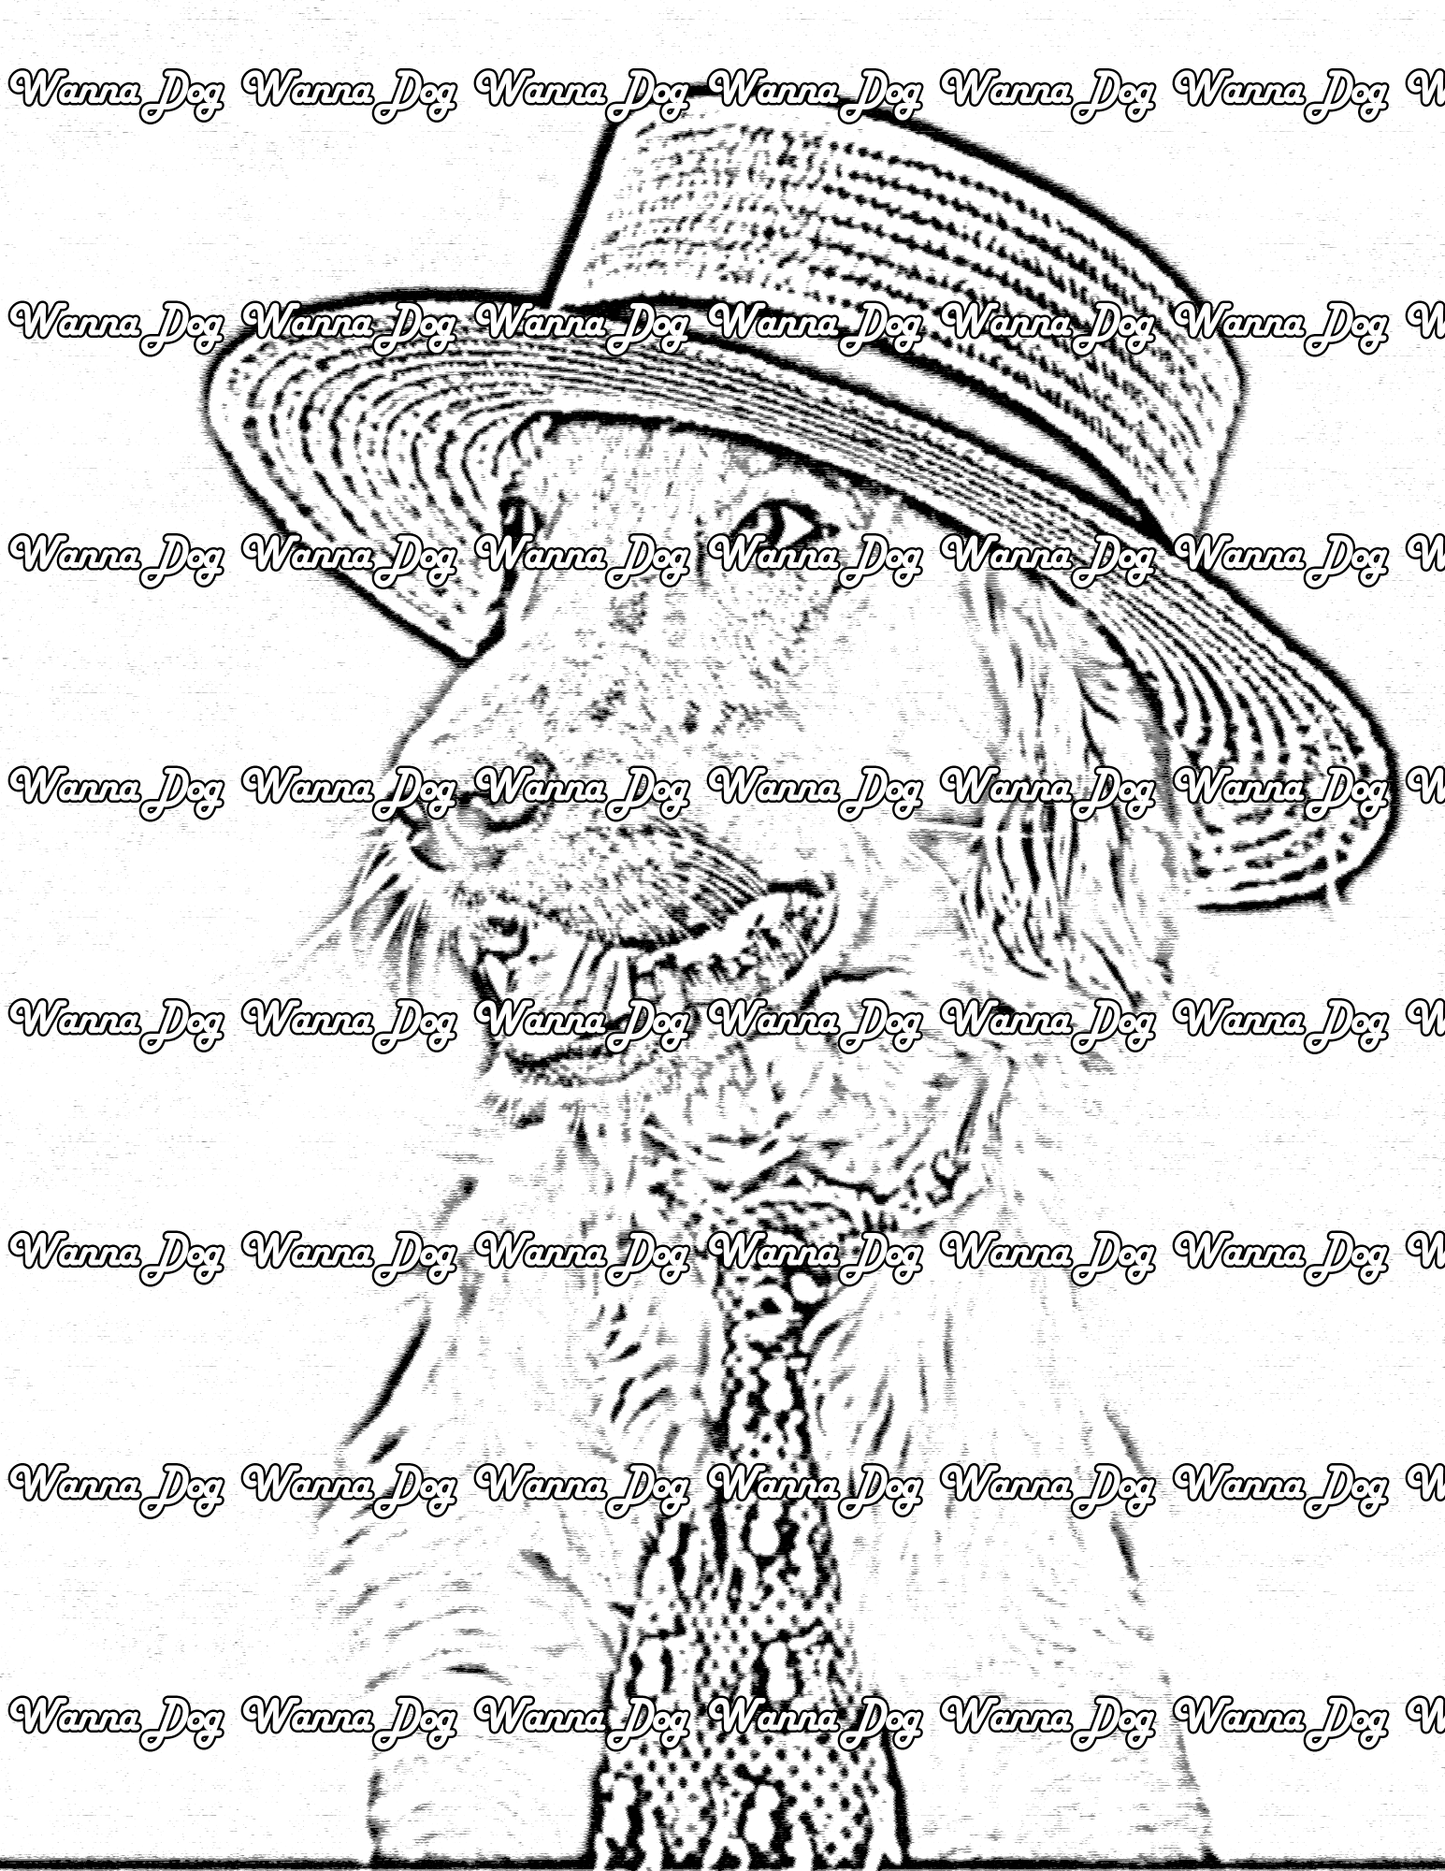 Irish Setter Coloring Page of a Irish Setter wearing a hat and tie